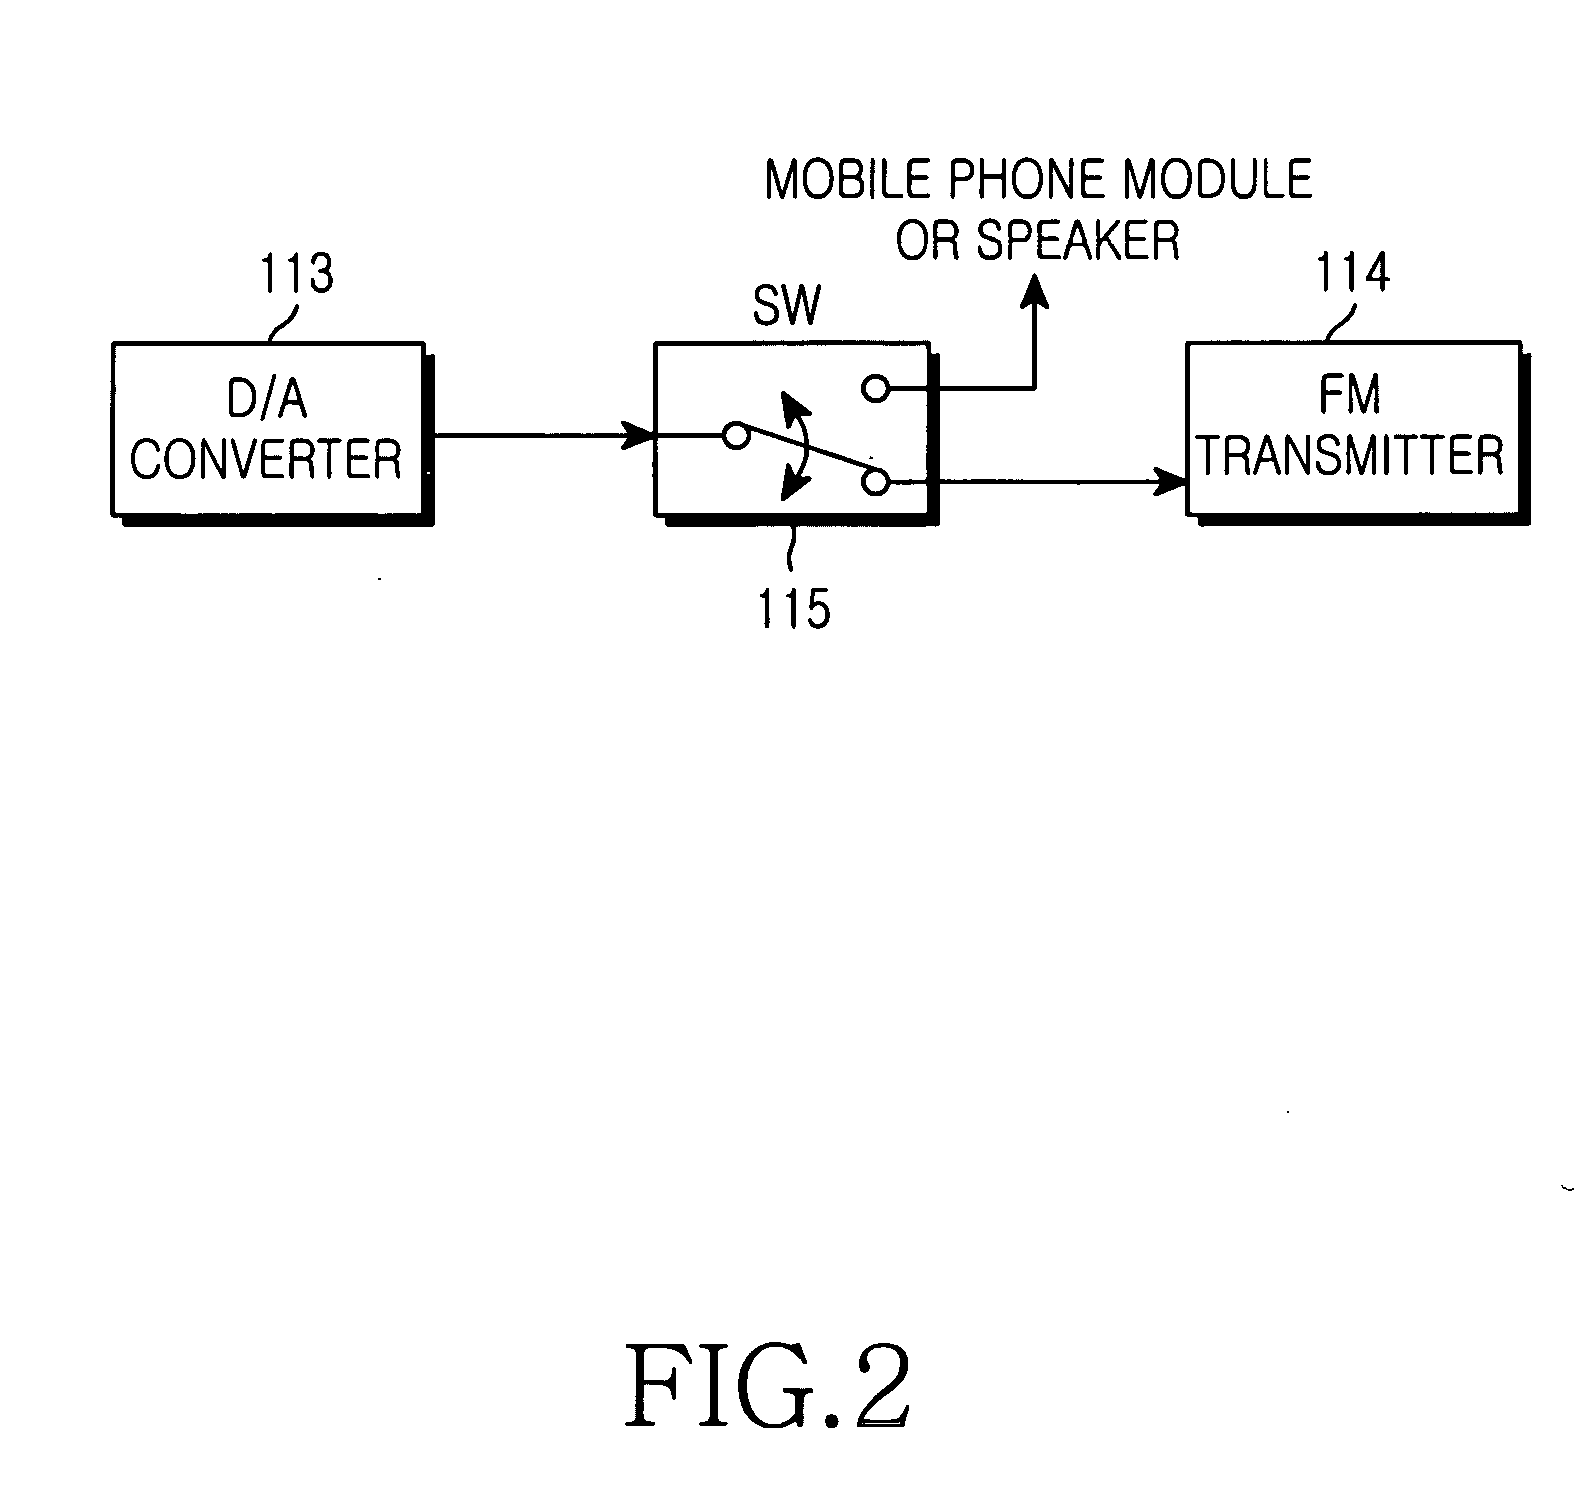 Method for controlling mobile phone to output audio signals and alert sounds through external audio player